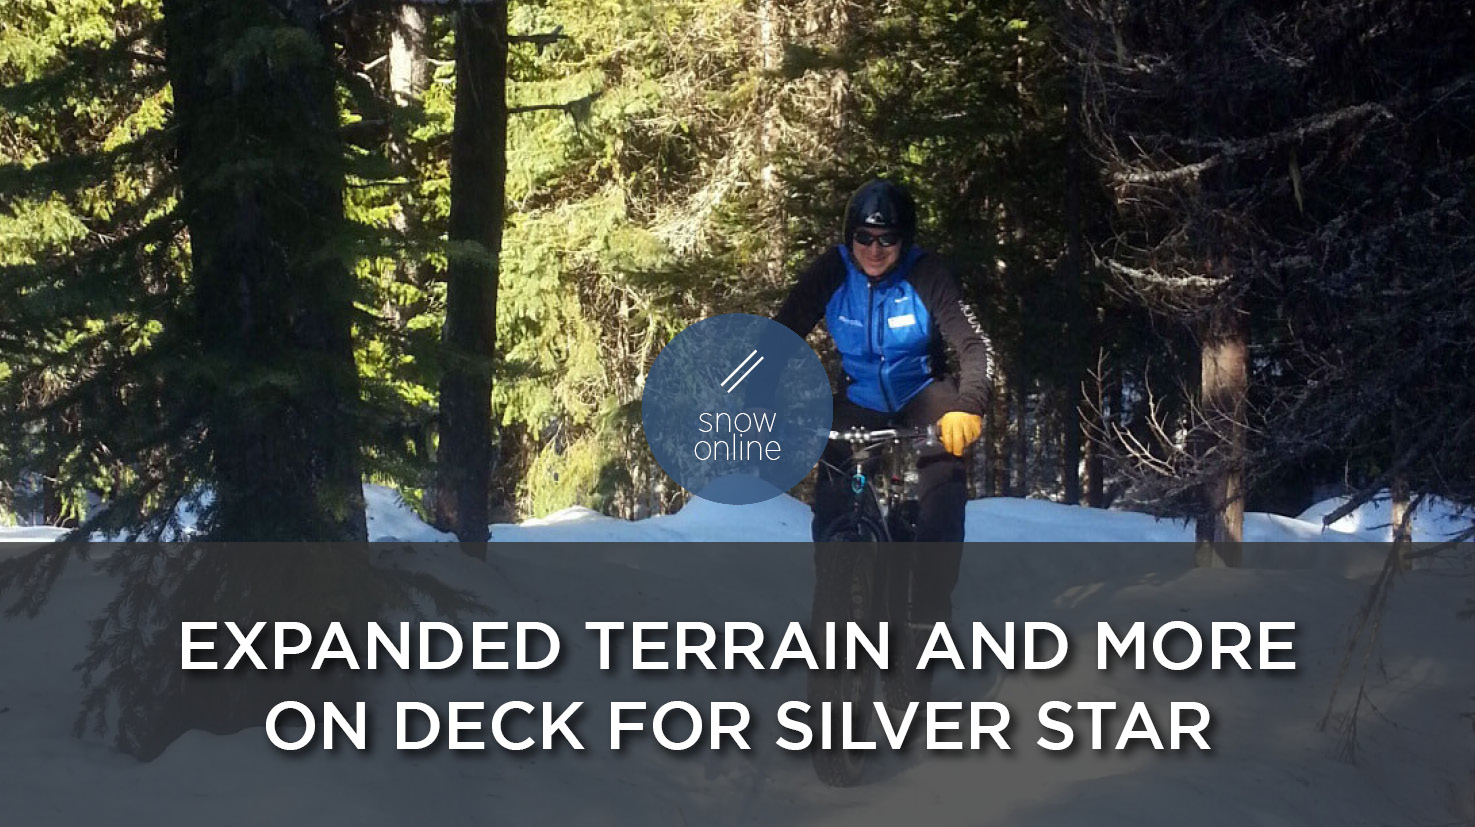 Expanded Terrain And More Winter Activities On Deck For Silver Star